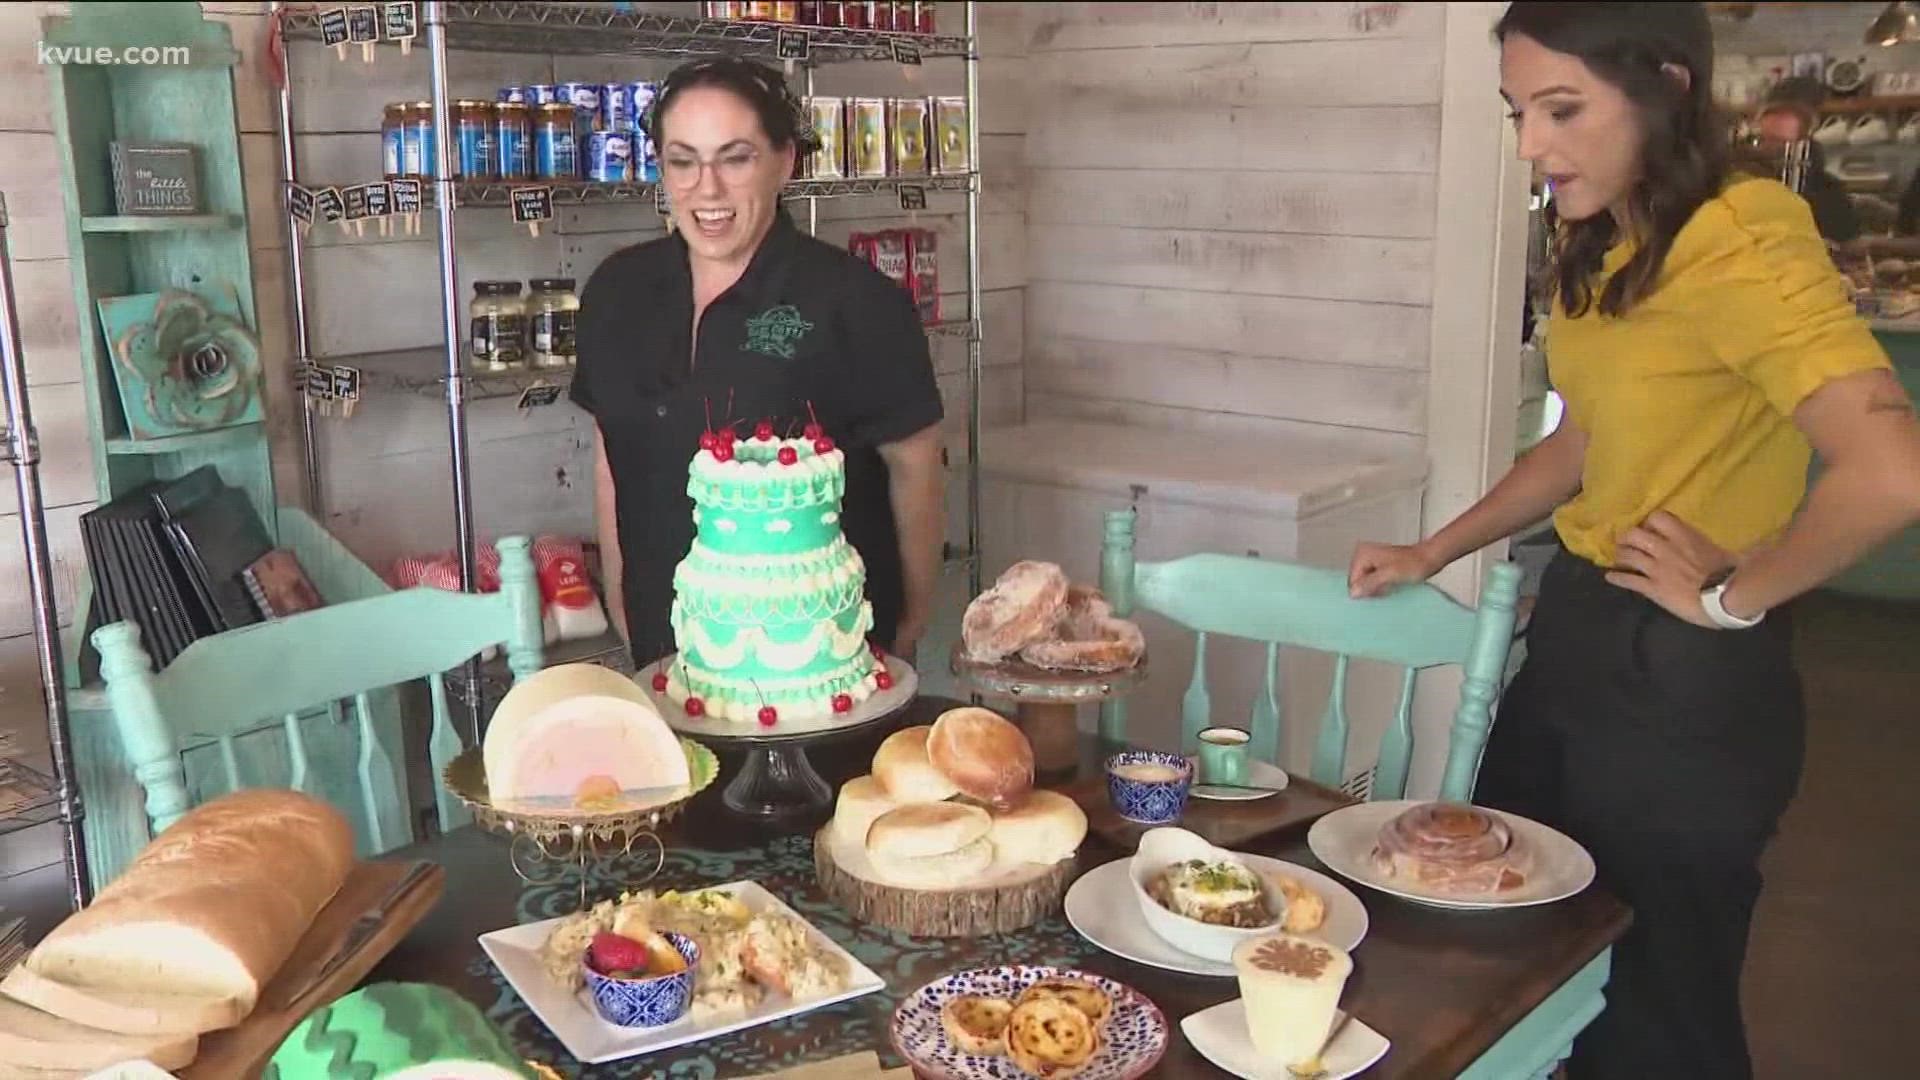 Enjoy cakes and pastries while supporting this local bakery in Leander.